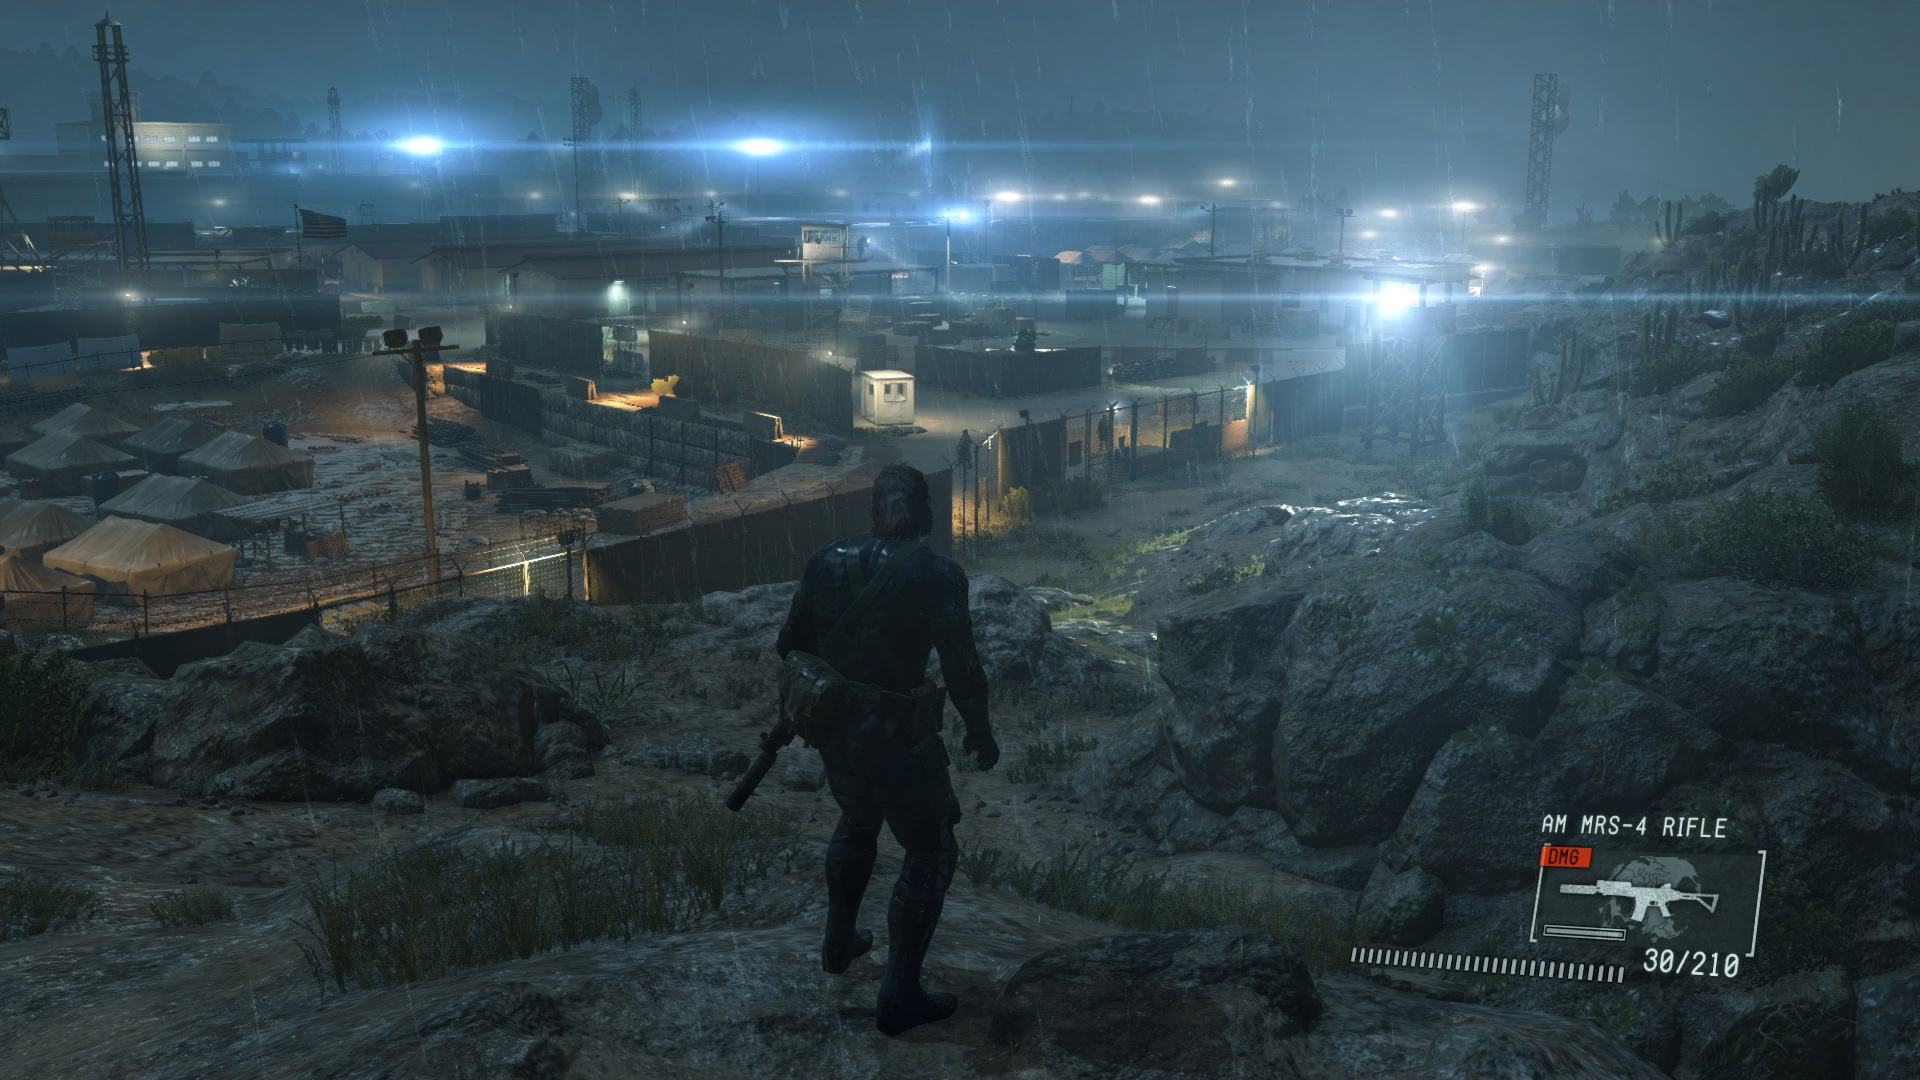 Amazing Metal Gear Solid V: Ground Zeroes Pictures & Backgrounds